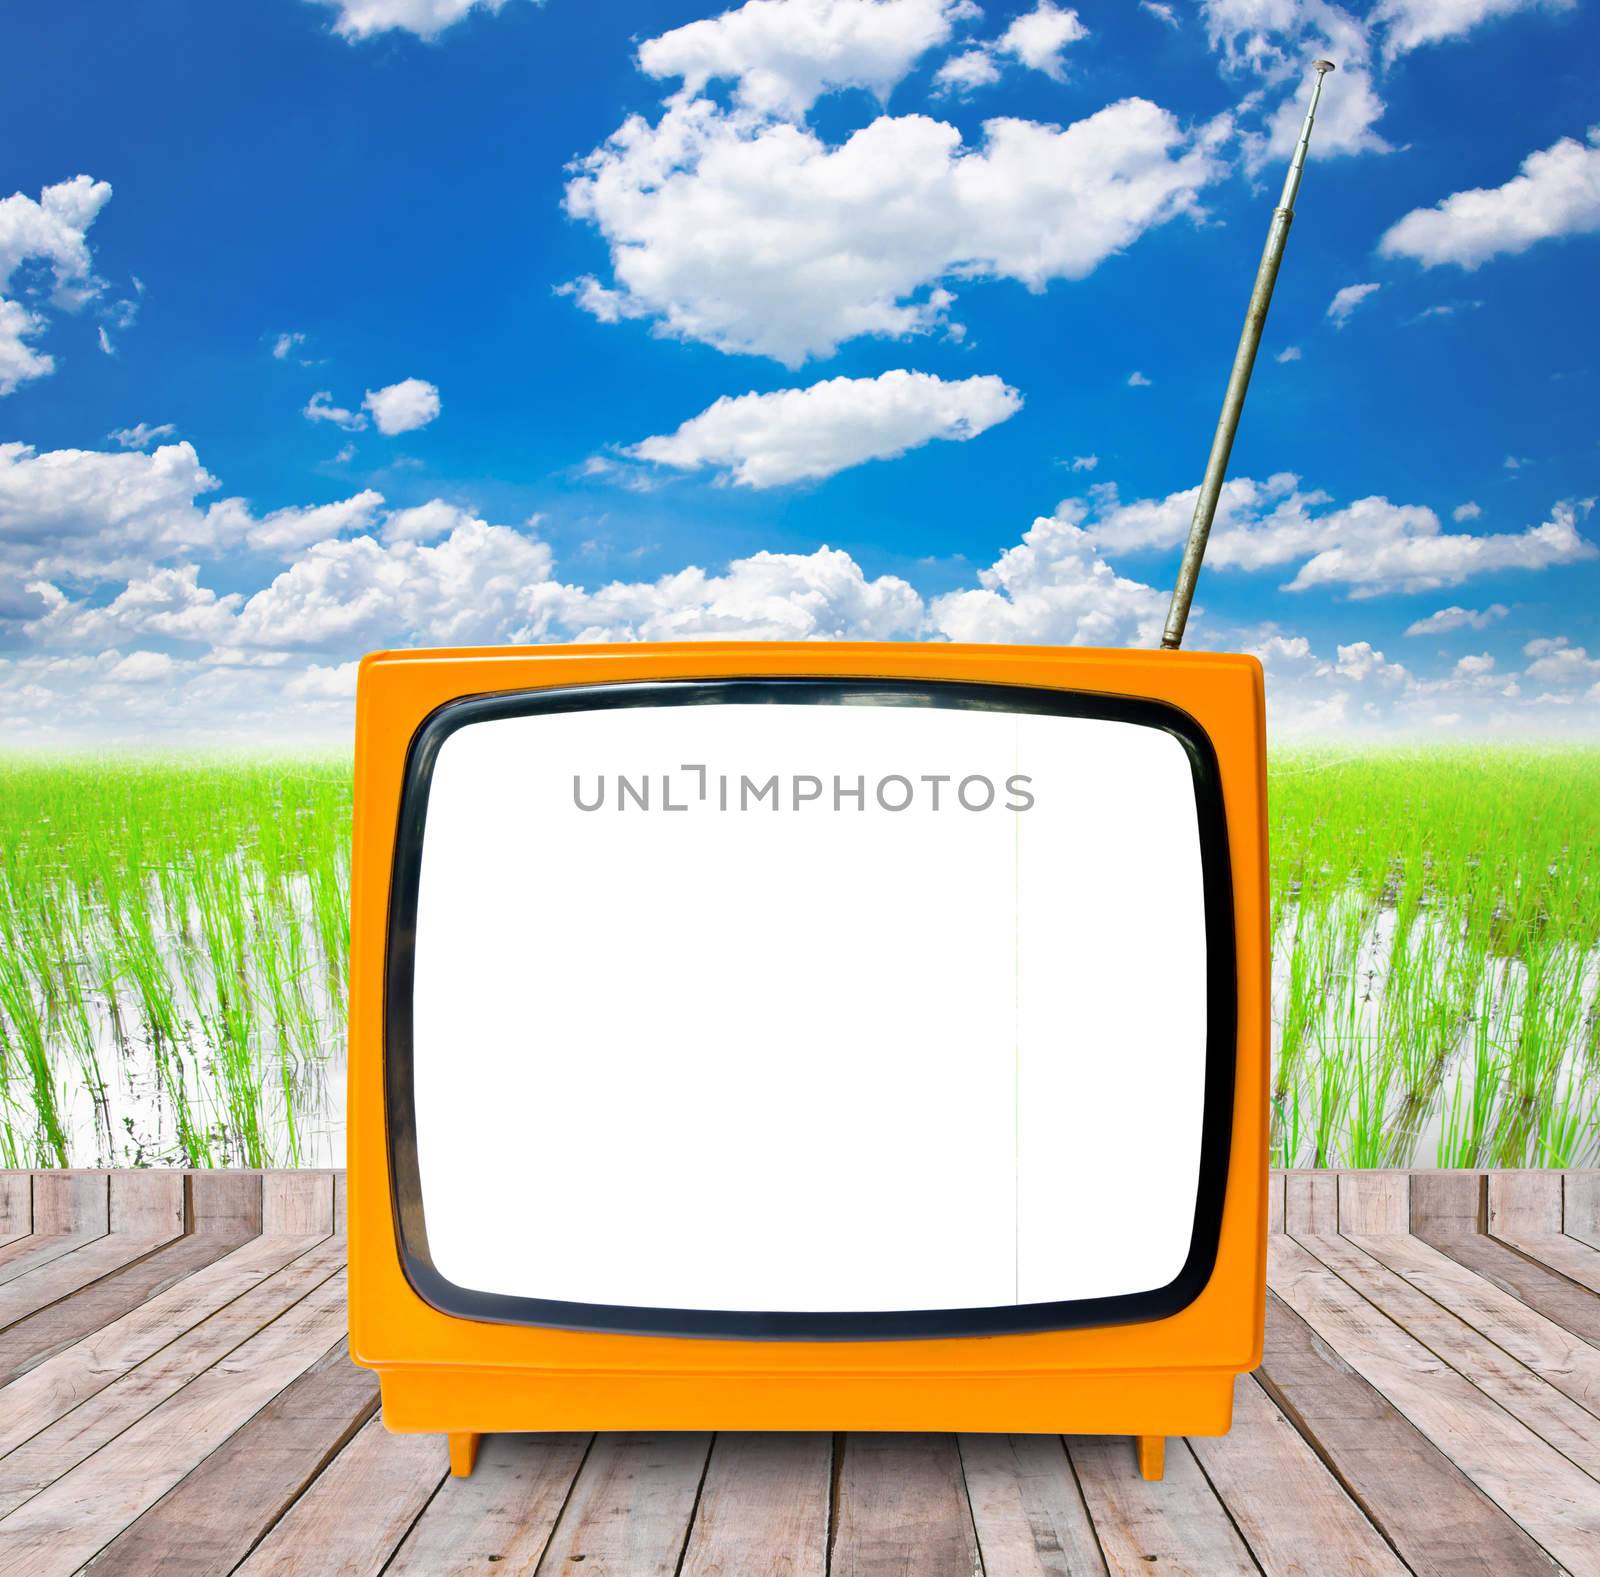 Photo of an old retro TV outdoors on wooden with blue sky and white clouds in the background.